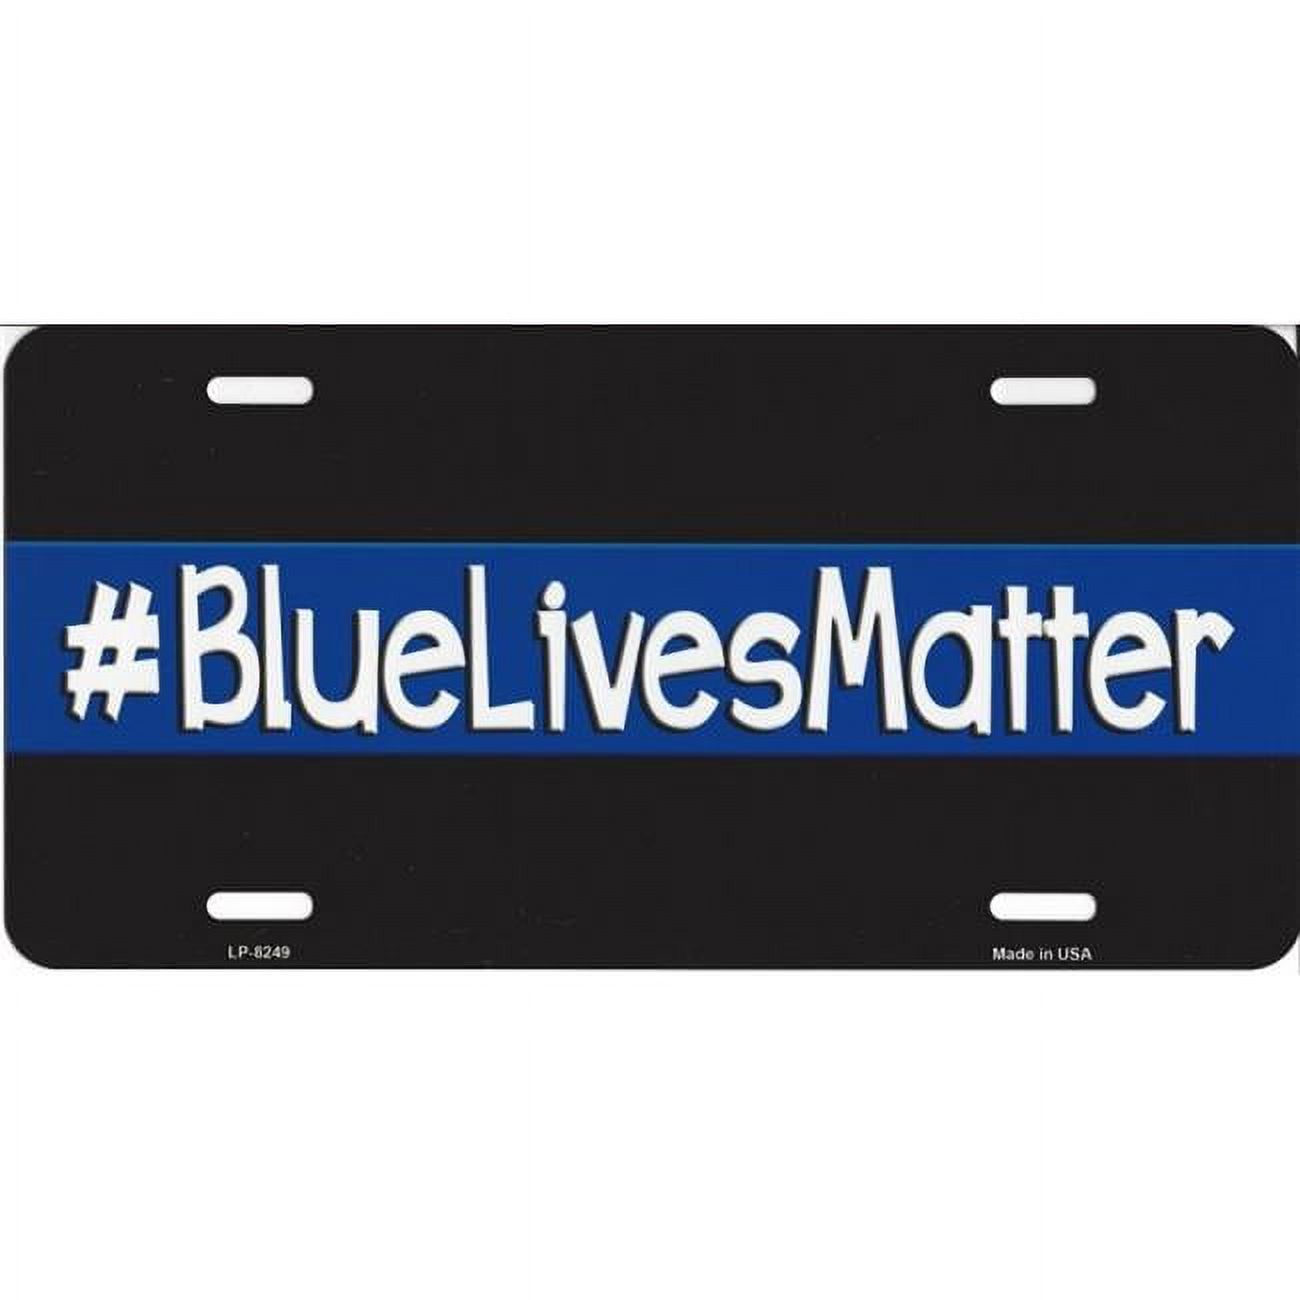 212 Main LP-8249 6 x 12 in. Blue Lives Matter Metal License Plate - image 1 of 2